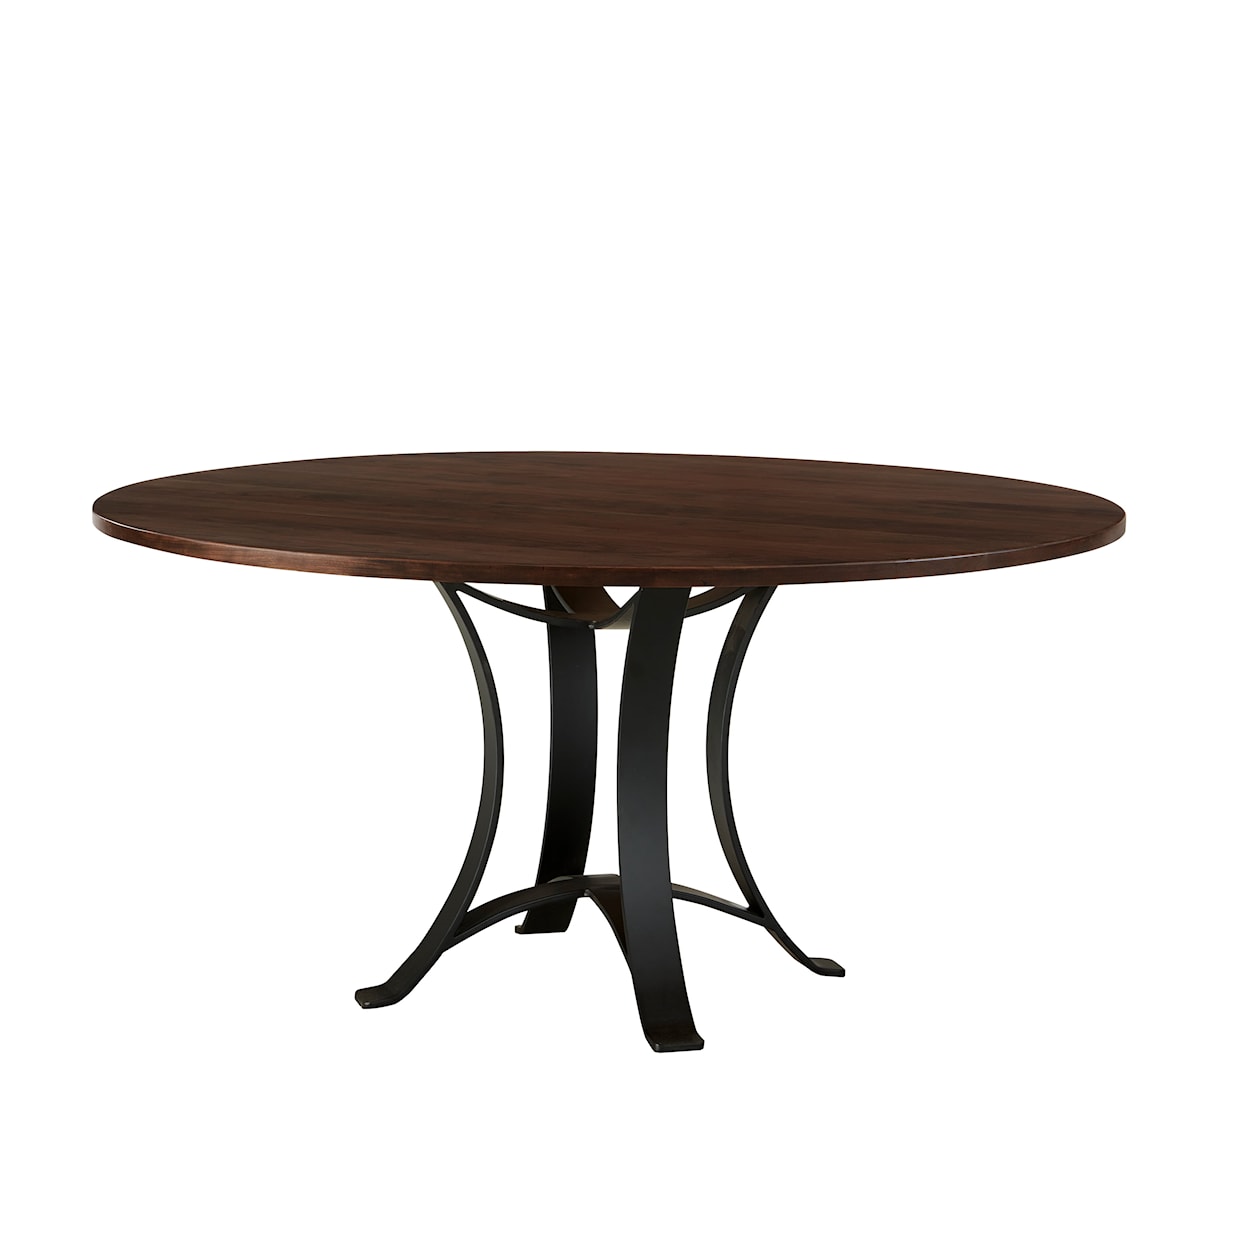 Virginia House Crafted Cherry - Dark 60" Round Dining Table